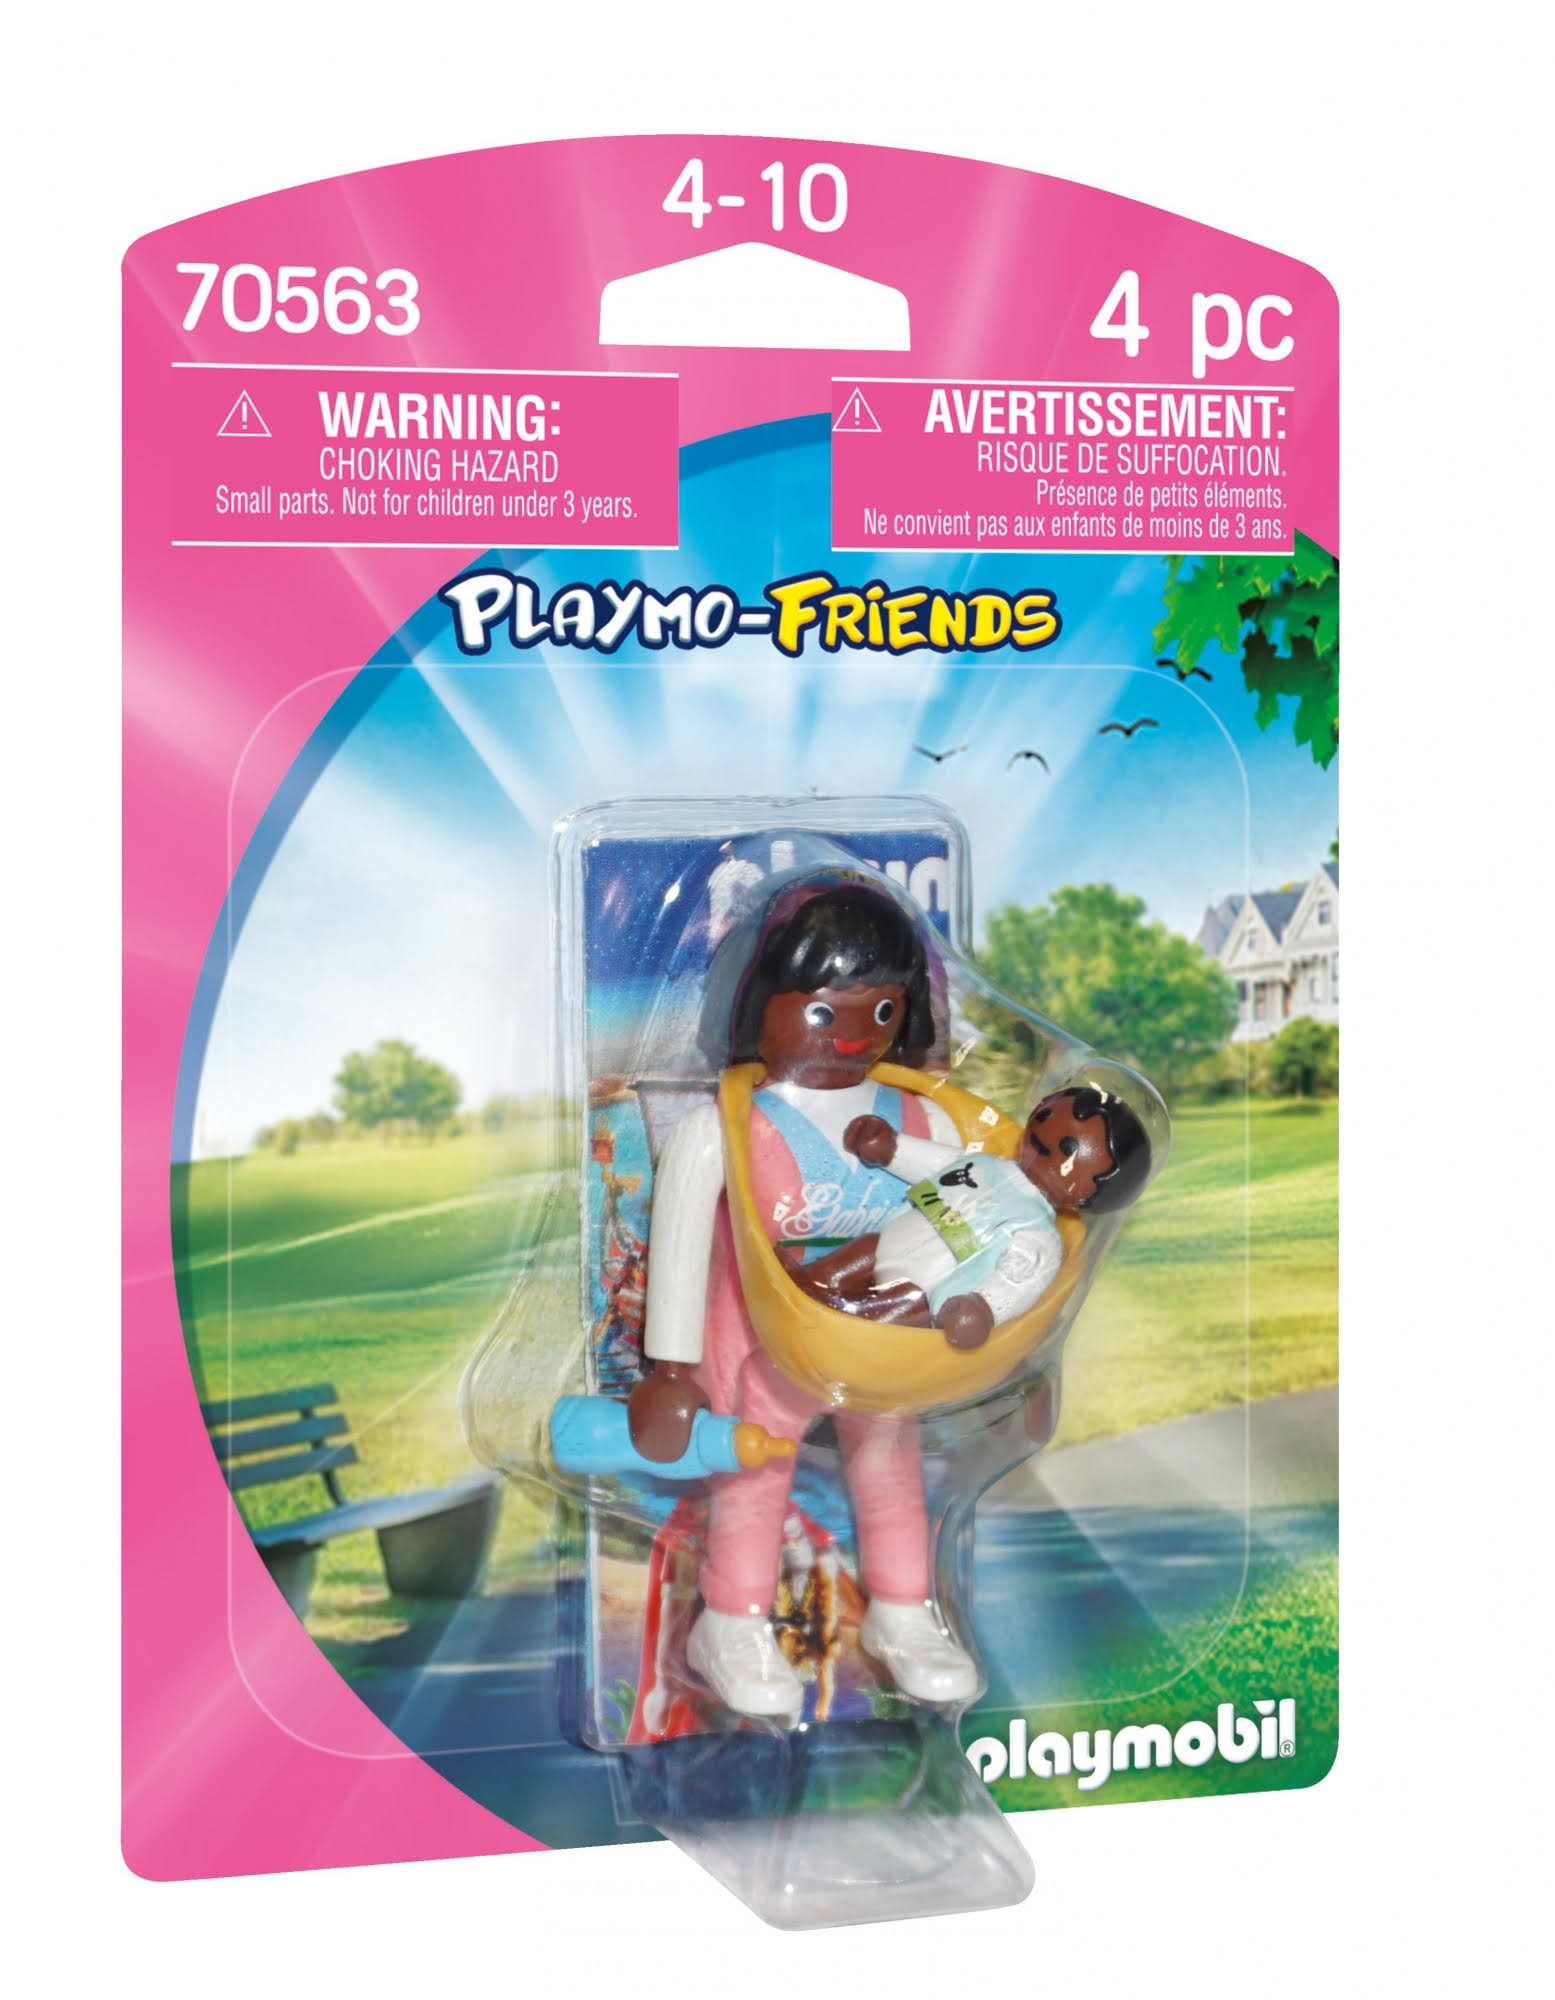 Playmobil Playmo-Friends - Mother with Baby Carrier (70563)